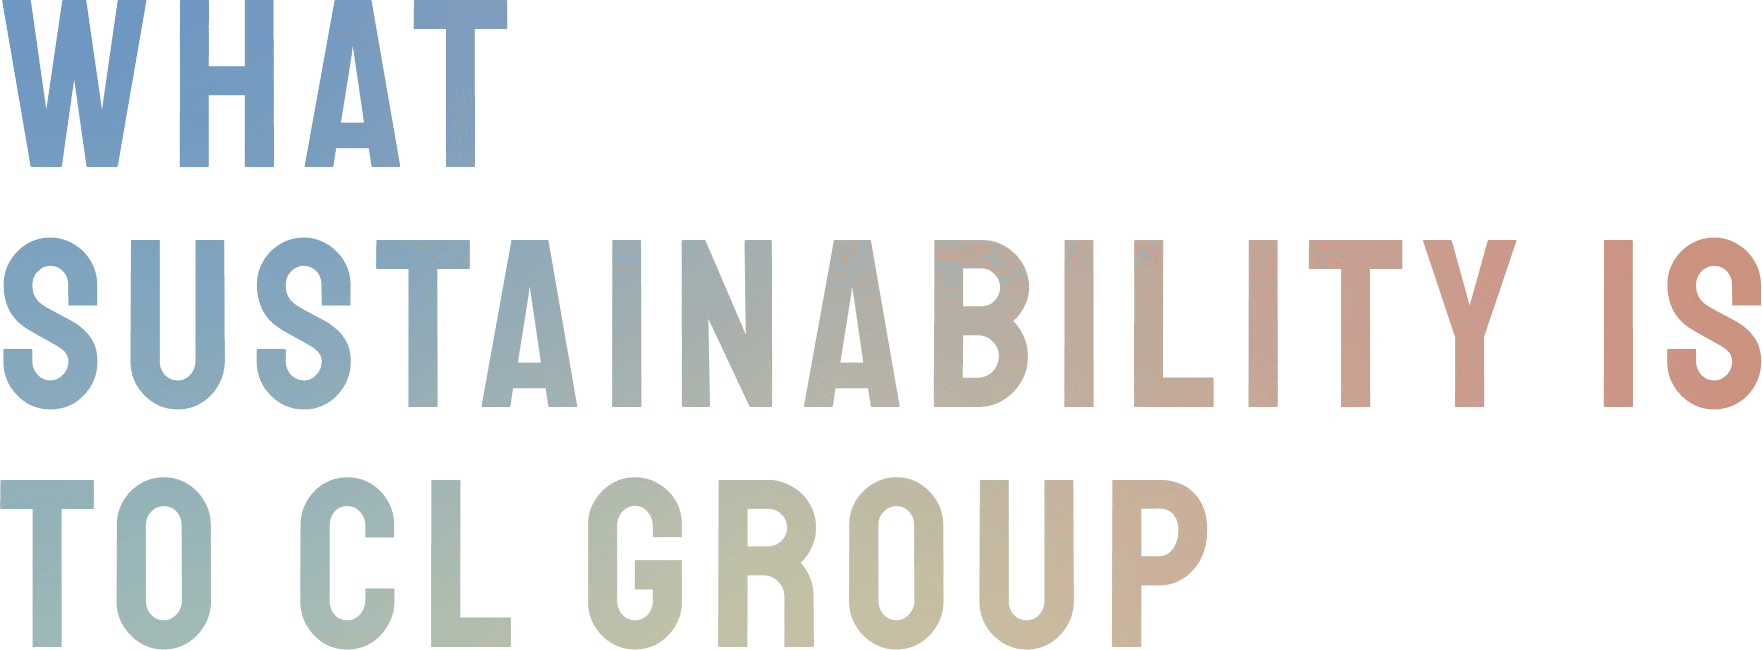 WHAT SUSTAINABILITY IS TO CL HOLDINGS